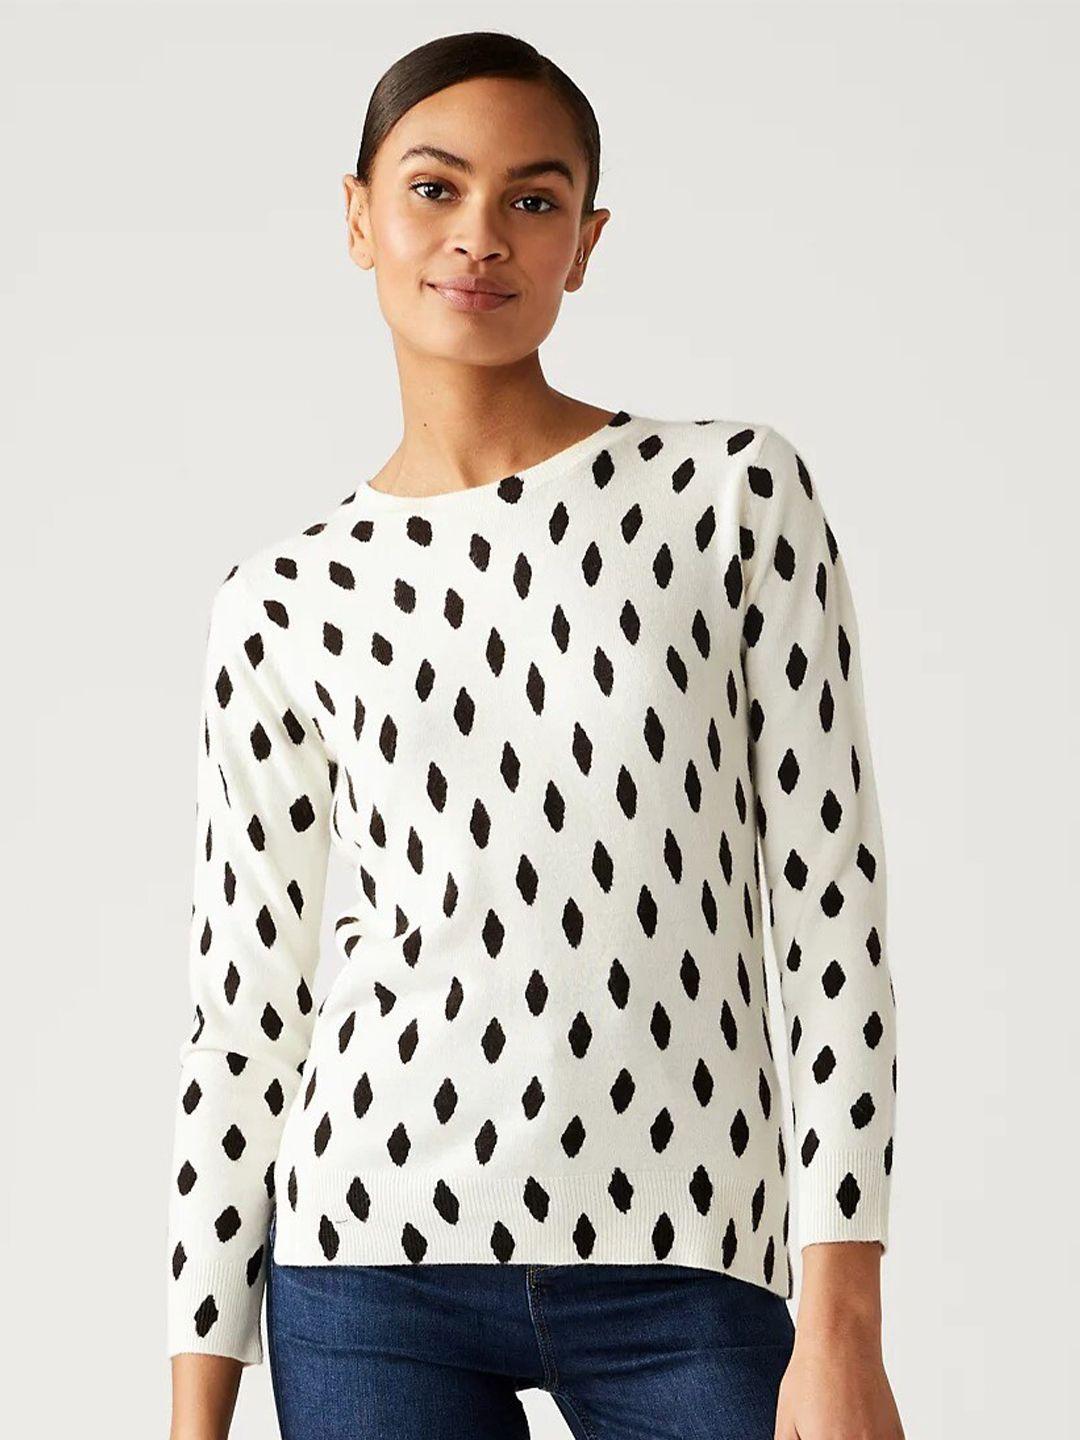 marks & spencer printed acrylic sweater